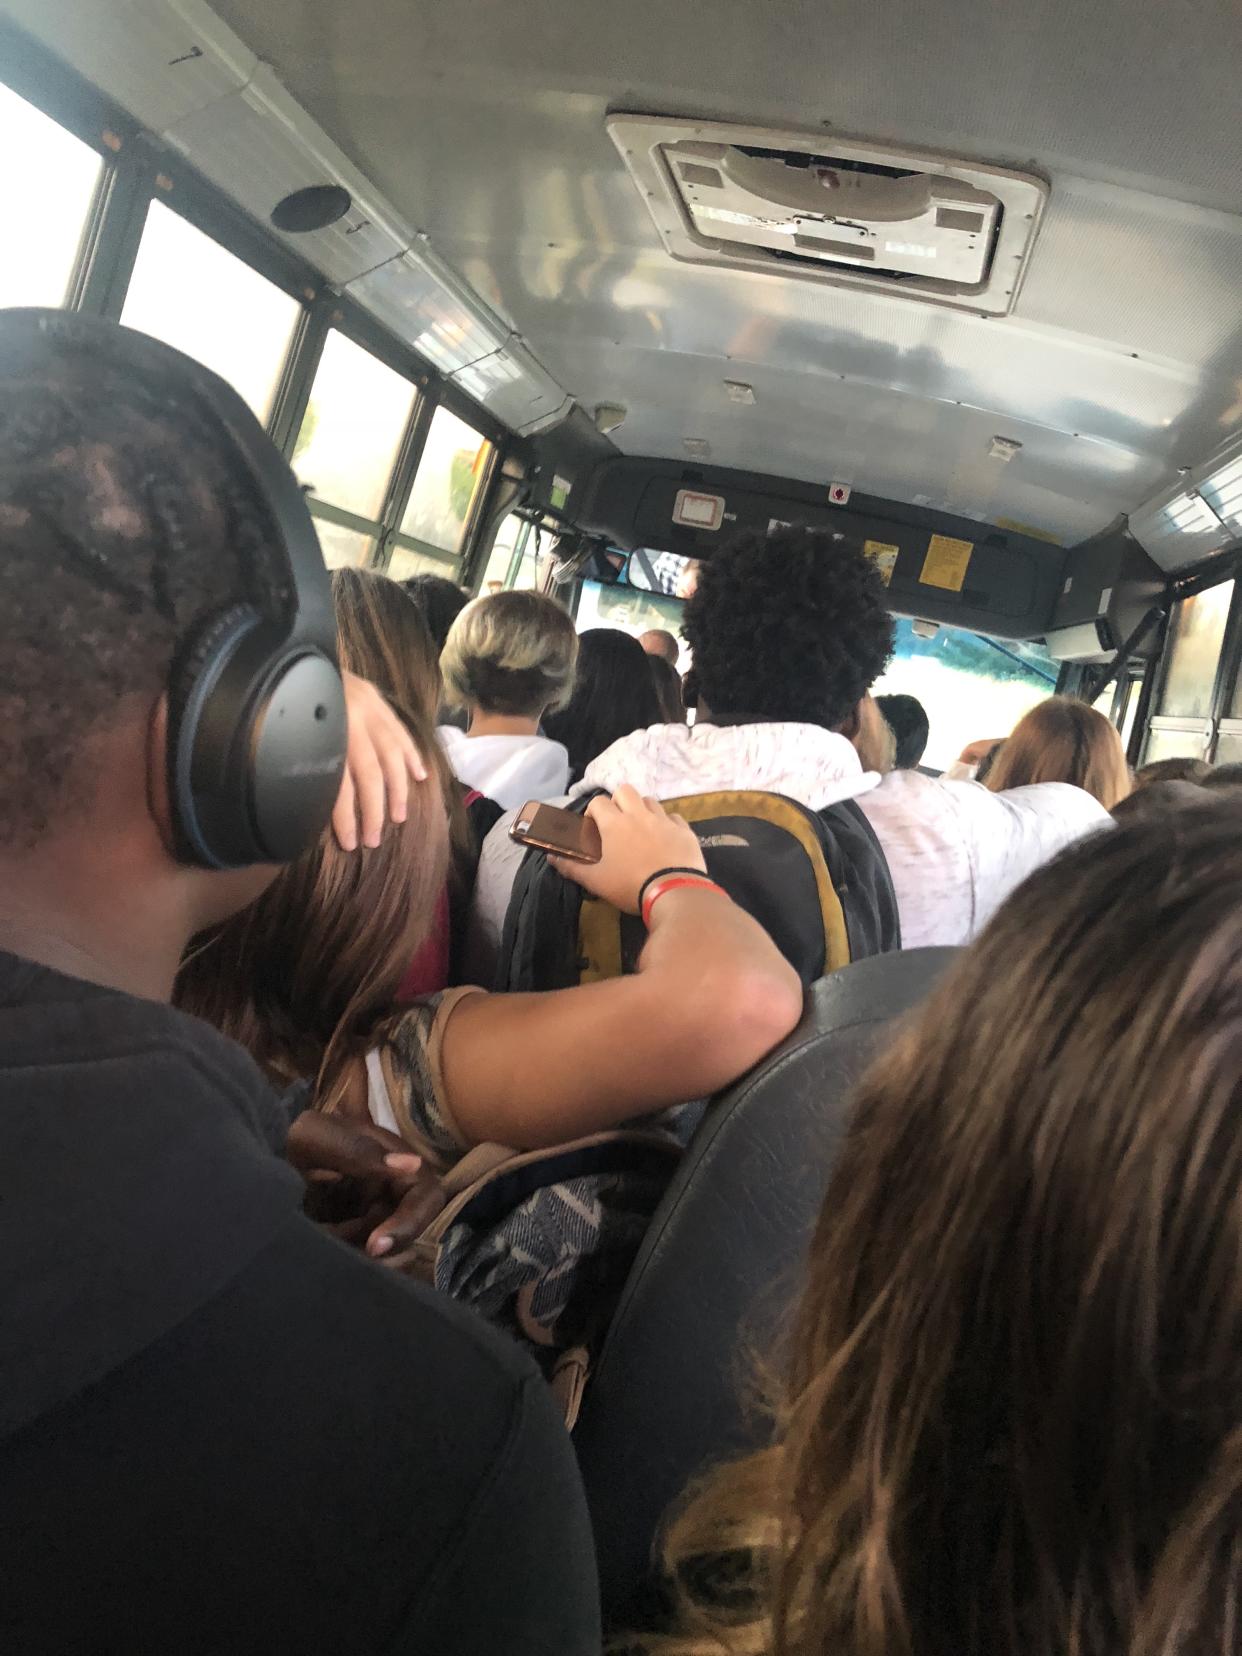 An overcrowded school bus is causing outrage in a Virginia community. (Photo: Courtesy of Jaime Hoben)